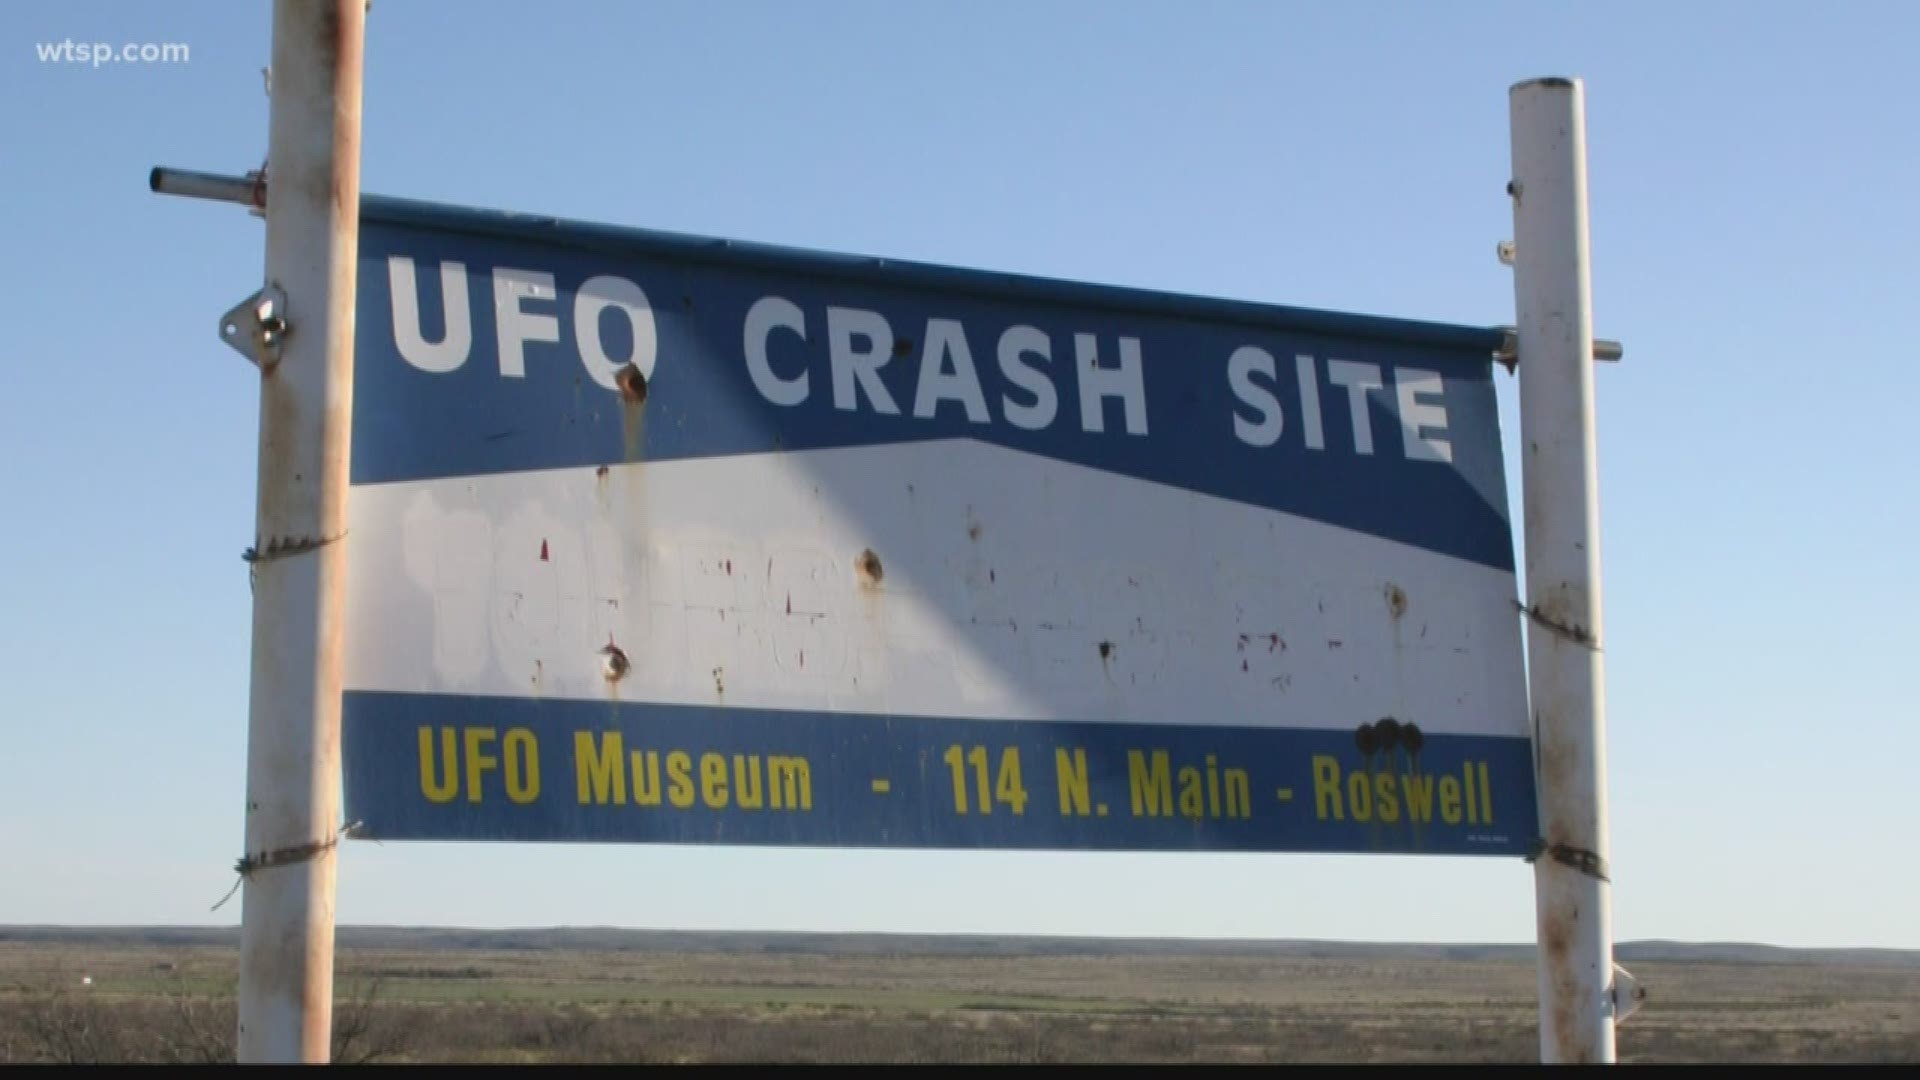 Scientists have for decades been trying to answer the question, "Are we alone in the universe?" Take a look back at the most famous reported "UFO" incident at Roswell, New Mexico.